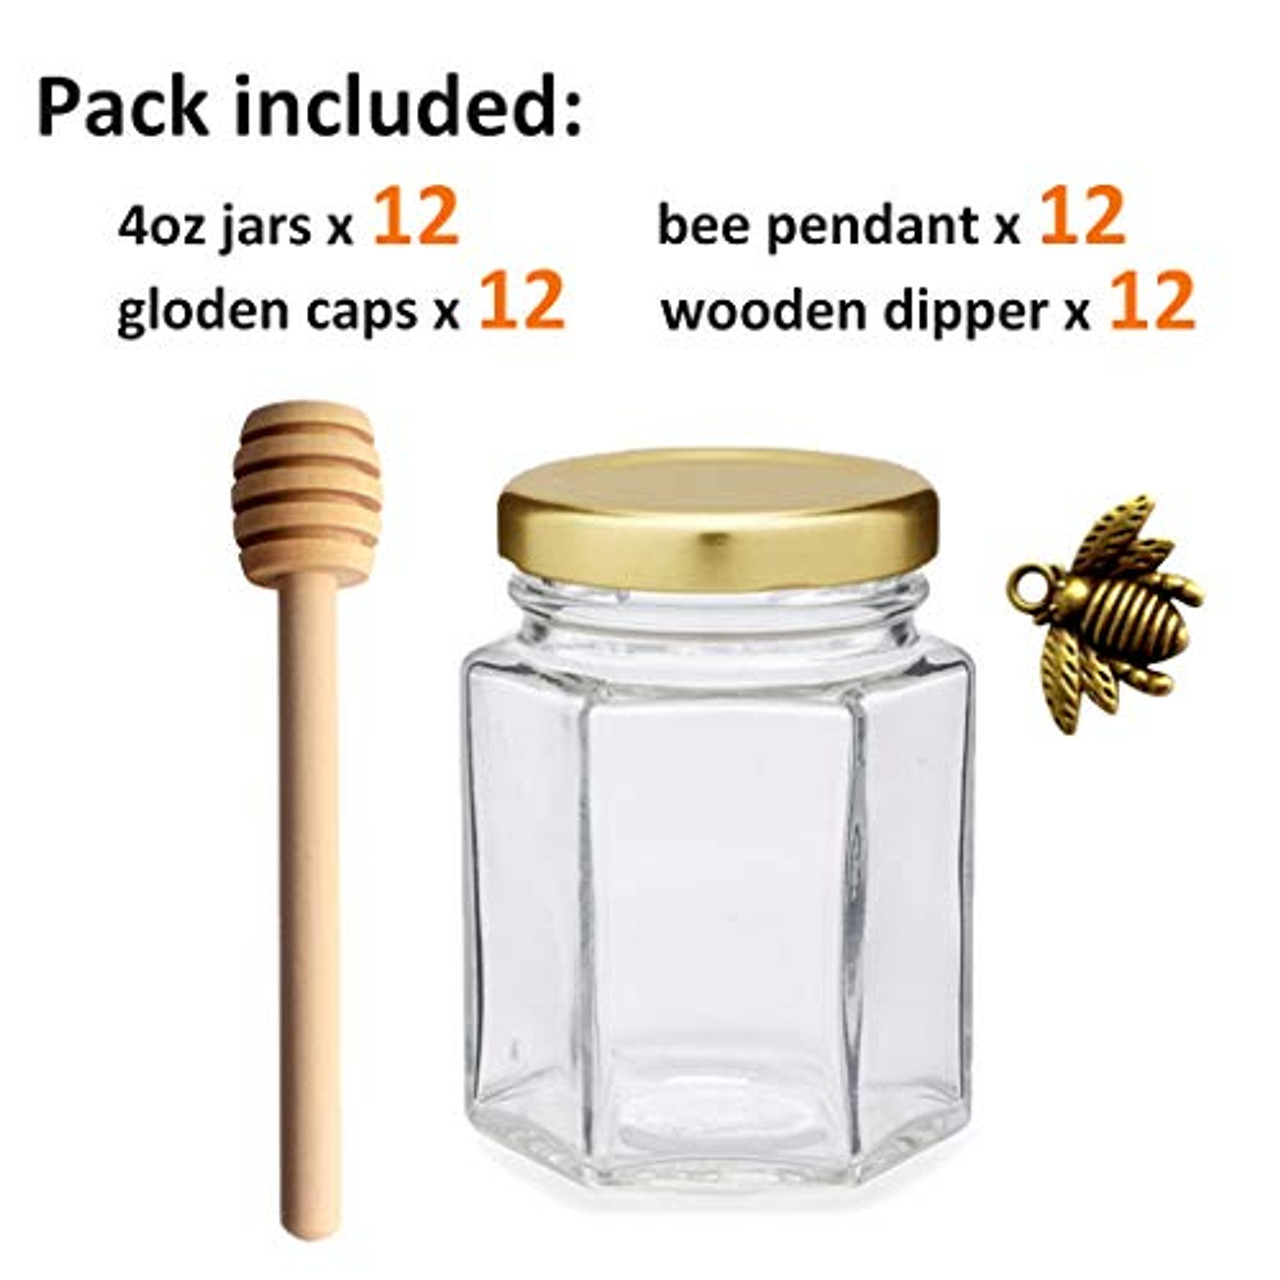  Tanlade 50 Pcs 3 oz Glass Jars with Lids Small Glass Jars Bulk  Mini Hexagon Honey Jars Mason Jars Spice Canning Jars with Gift Bags  Stickers and Tags for Baby Shower